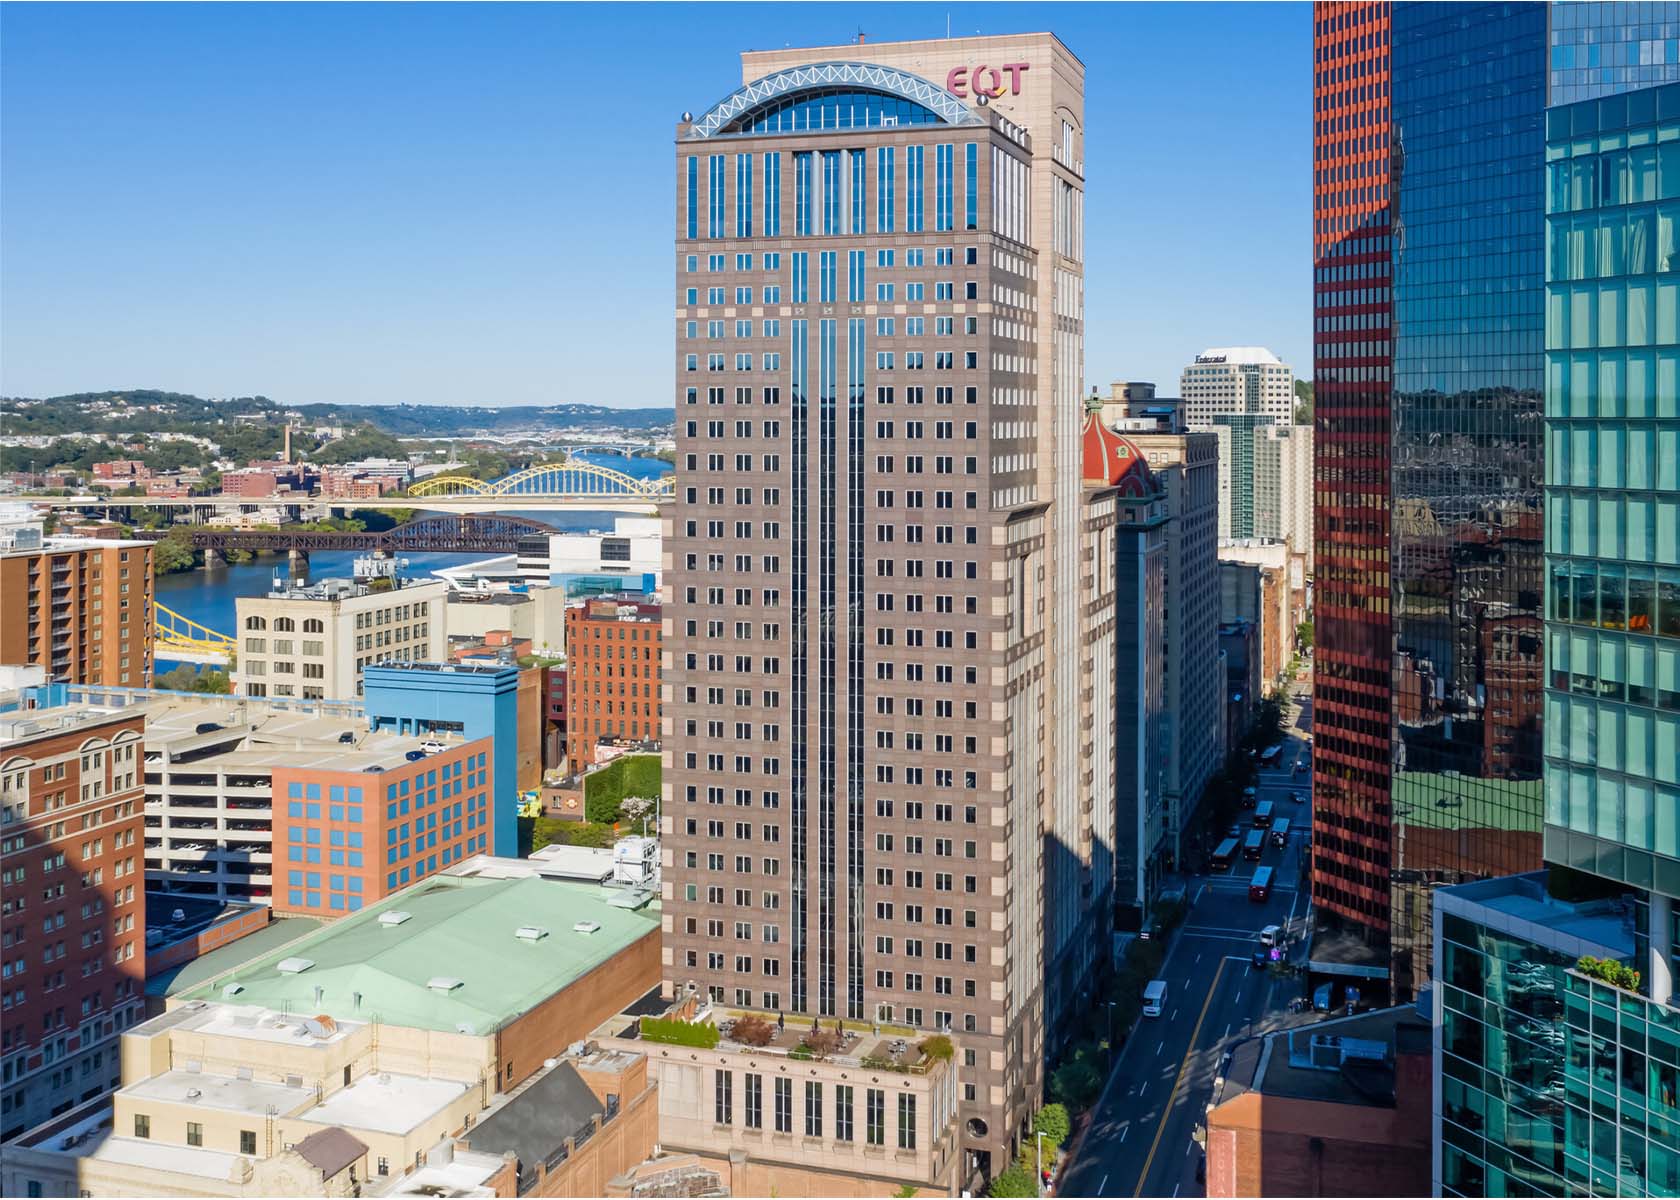 EQT Plaza tower in Pittsburgh aerial-view